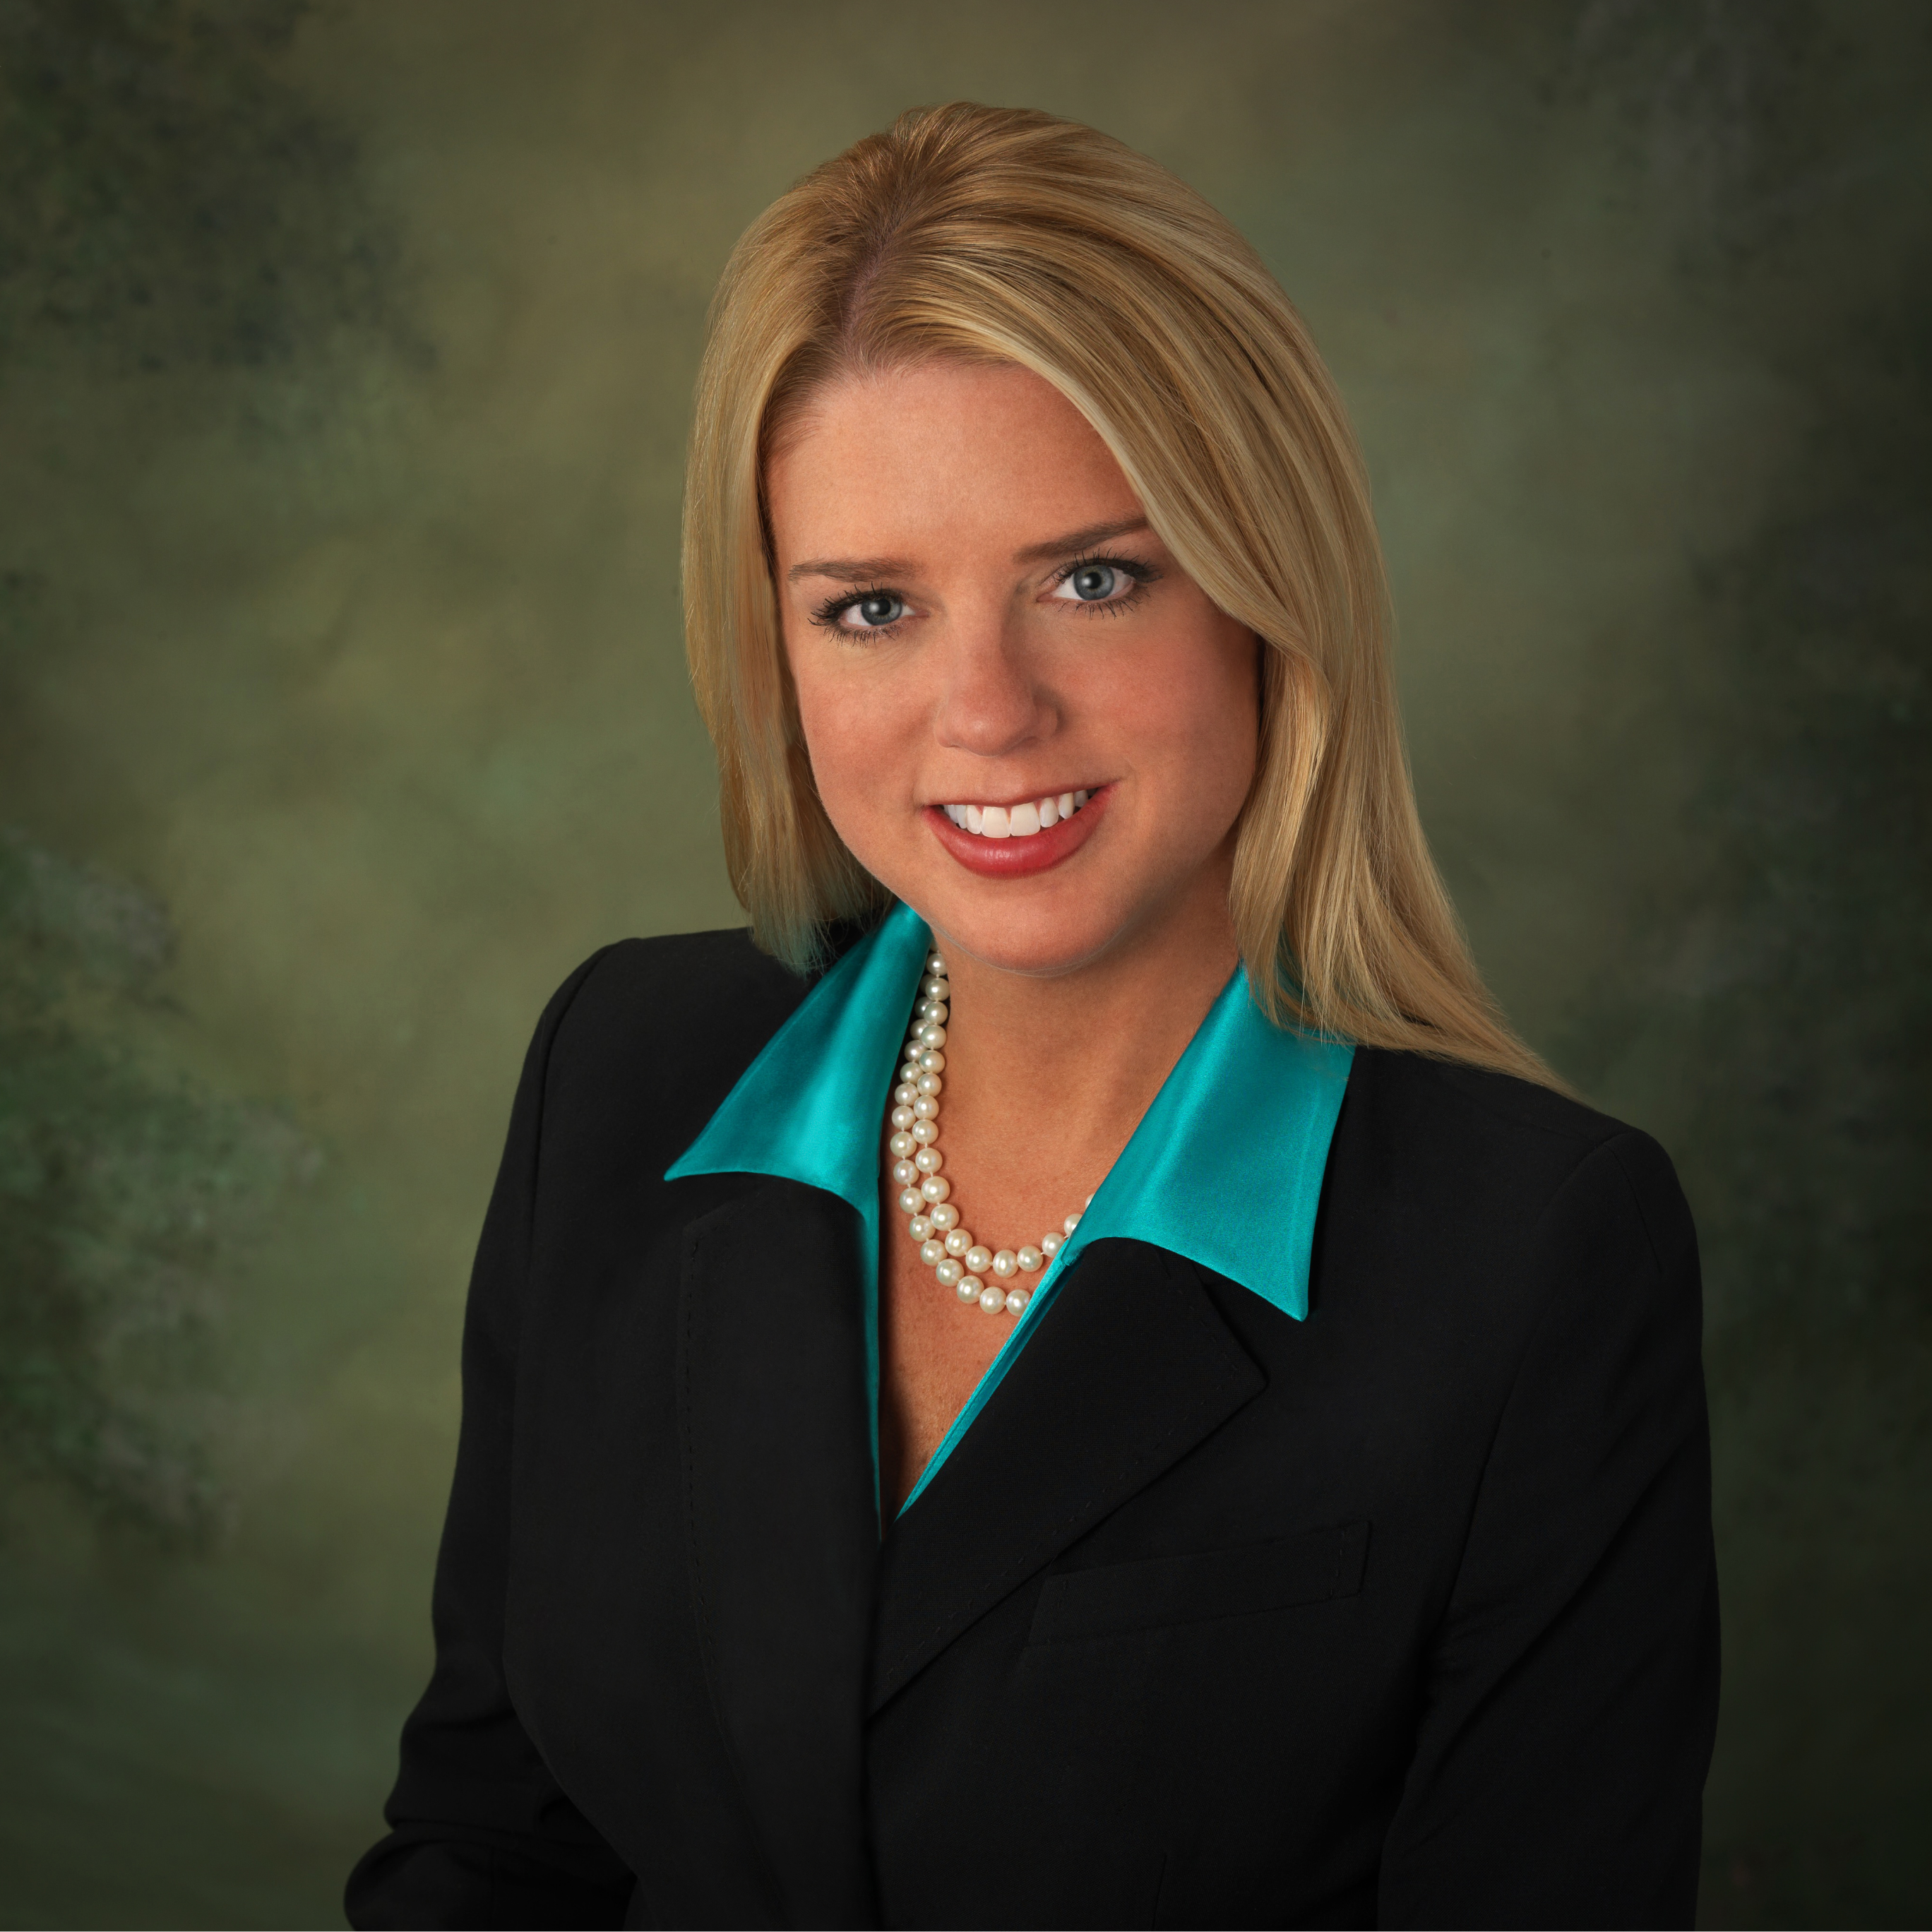 Pam Bondi is the hottest female politican in the US